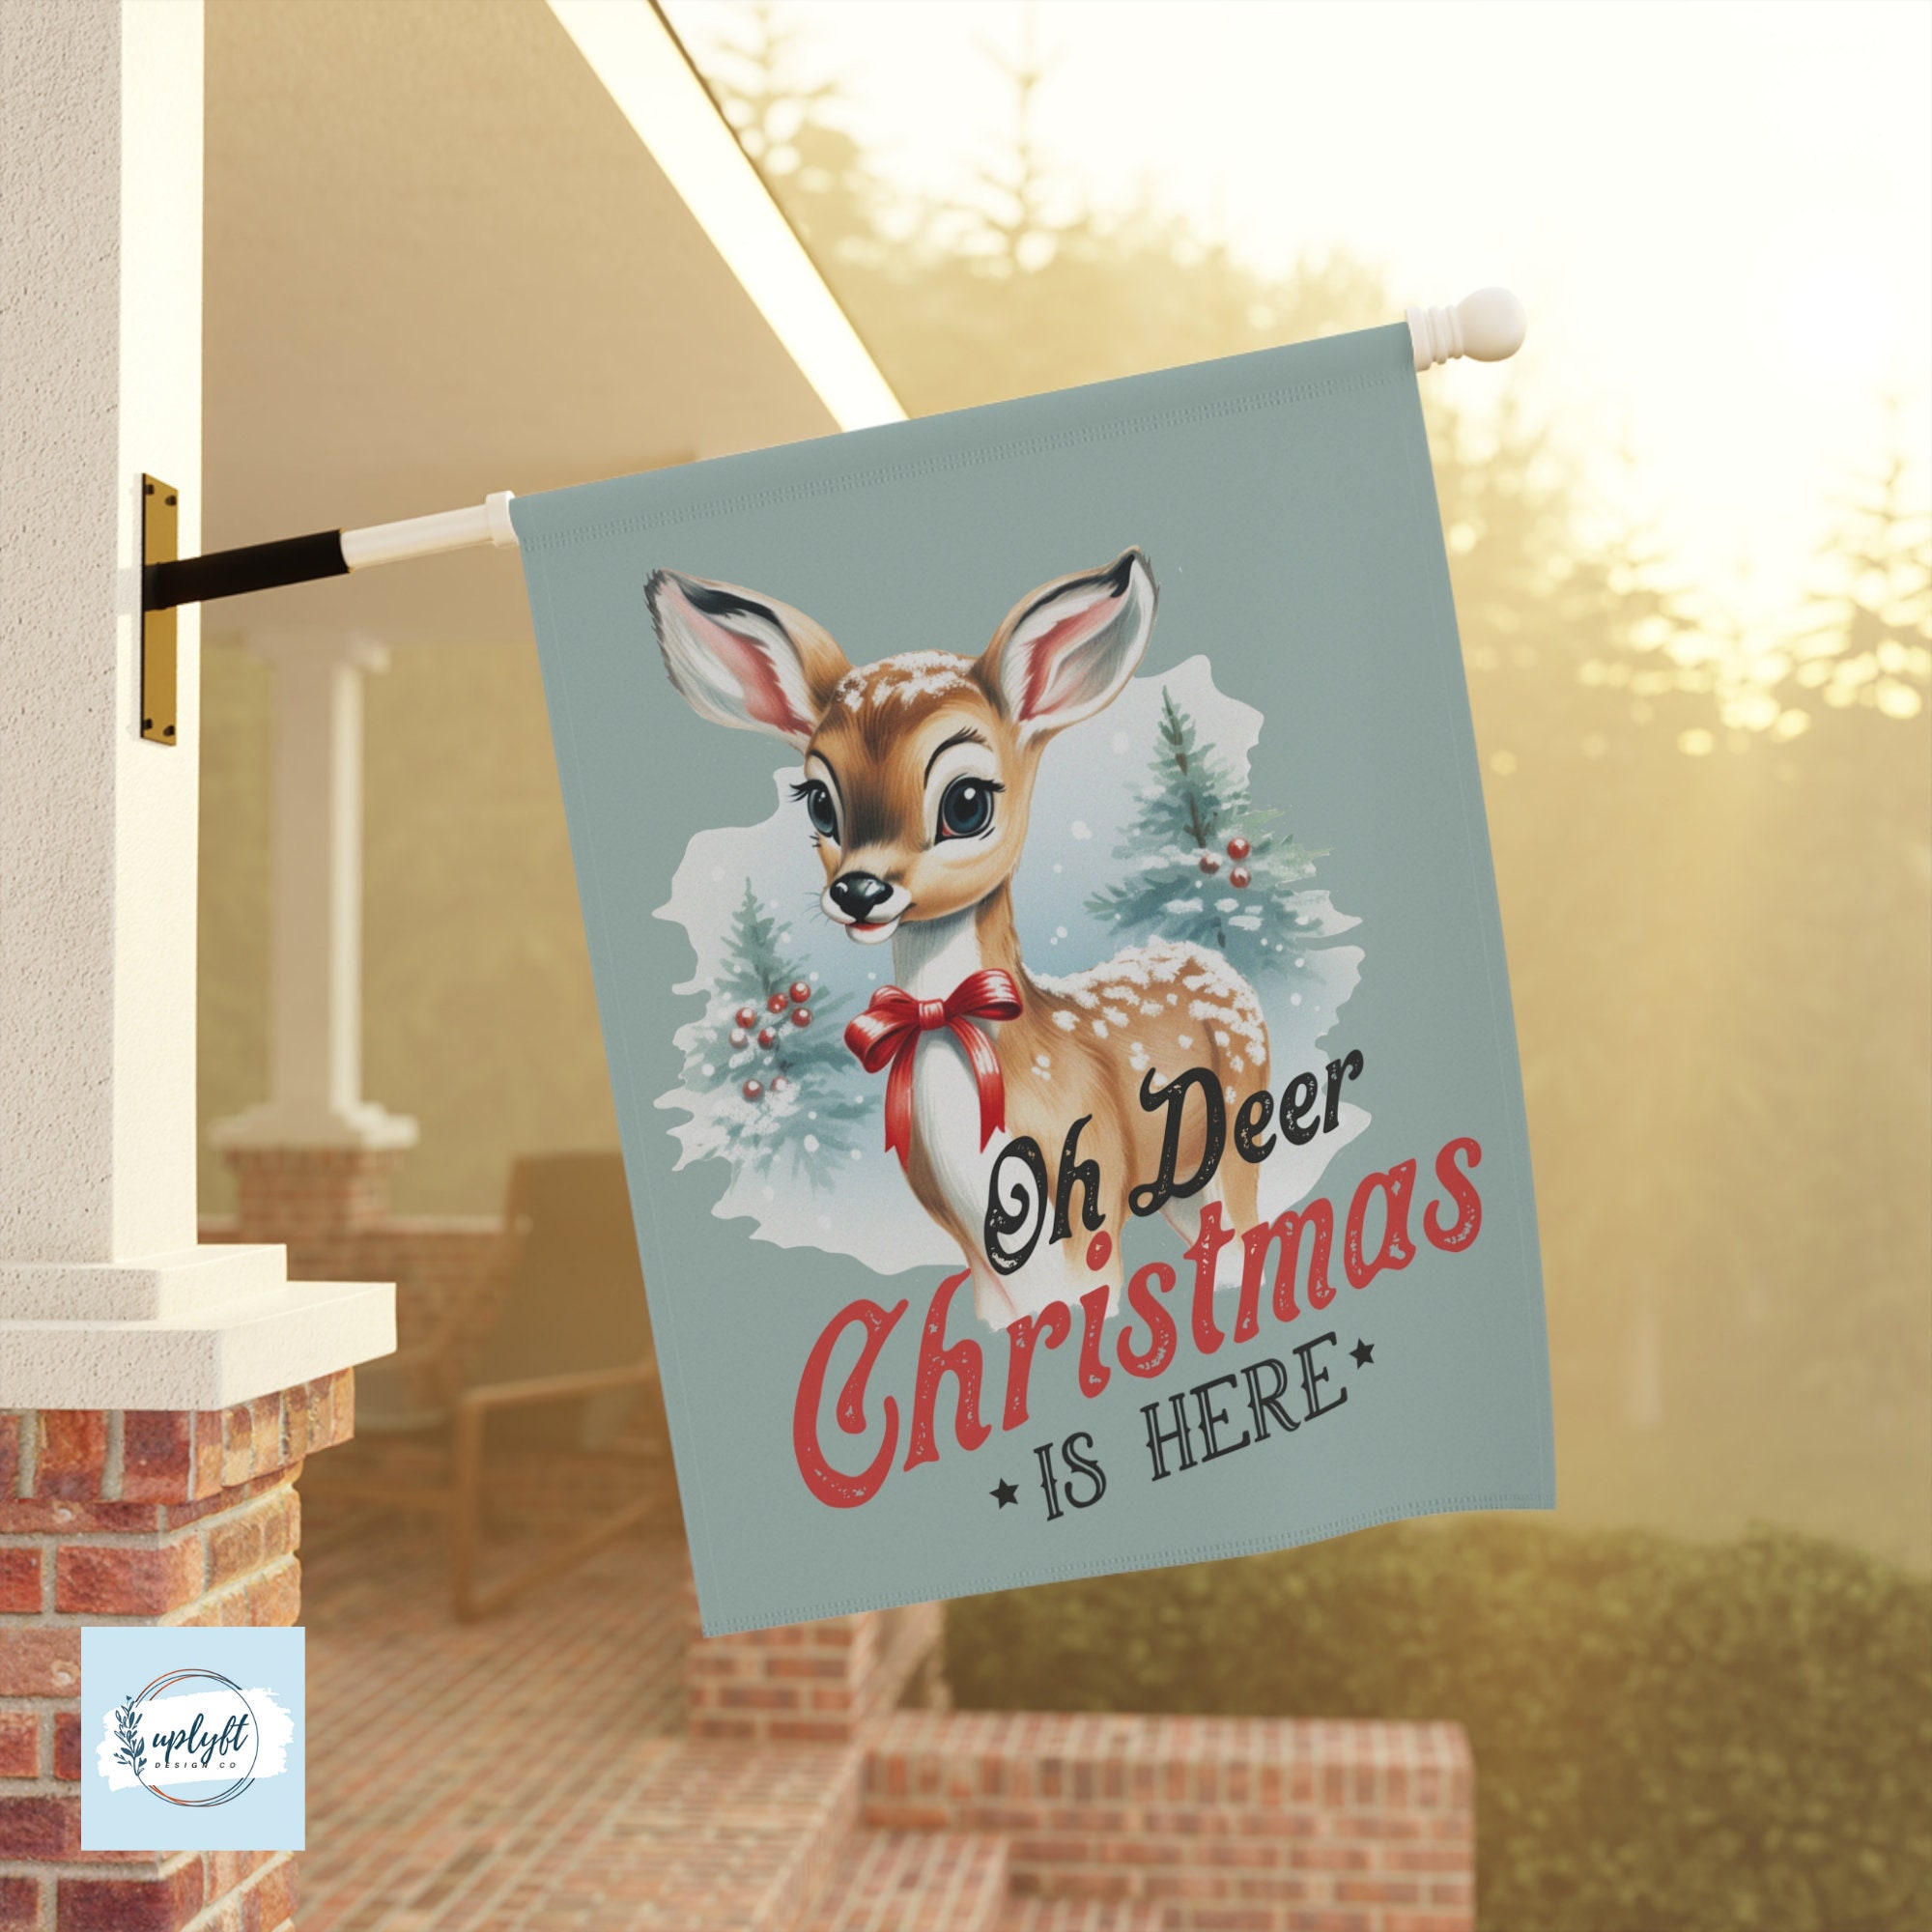 Discover Oh Deer Christmas Is Here Retro Christmas House Flag, Cute Deer Christmas Home Decor Gift